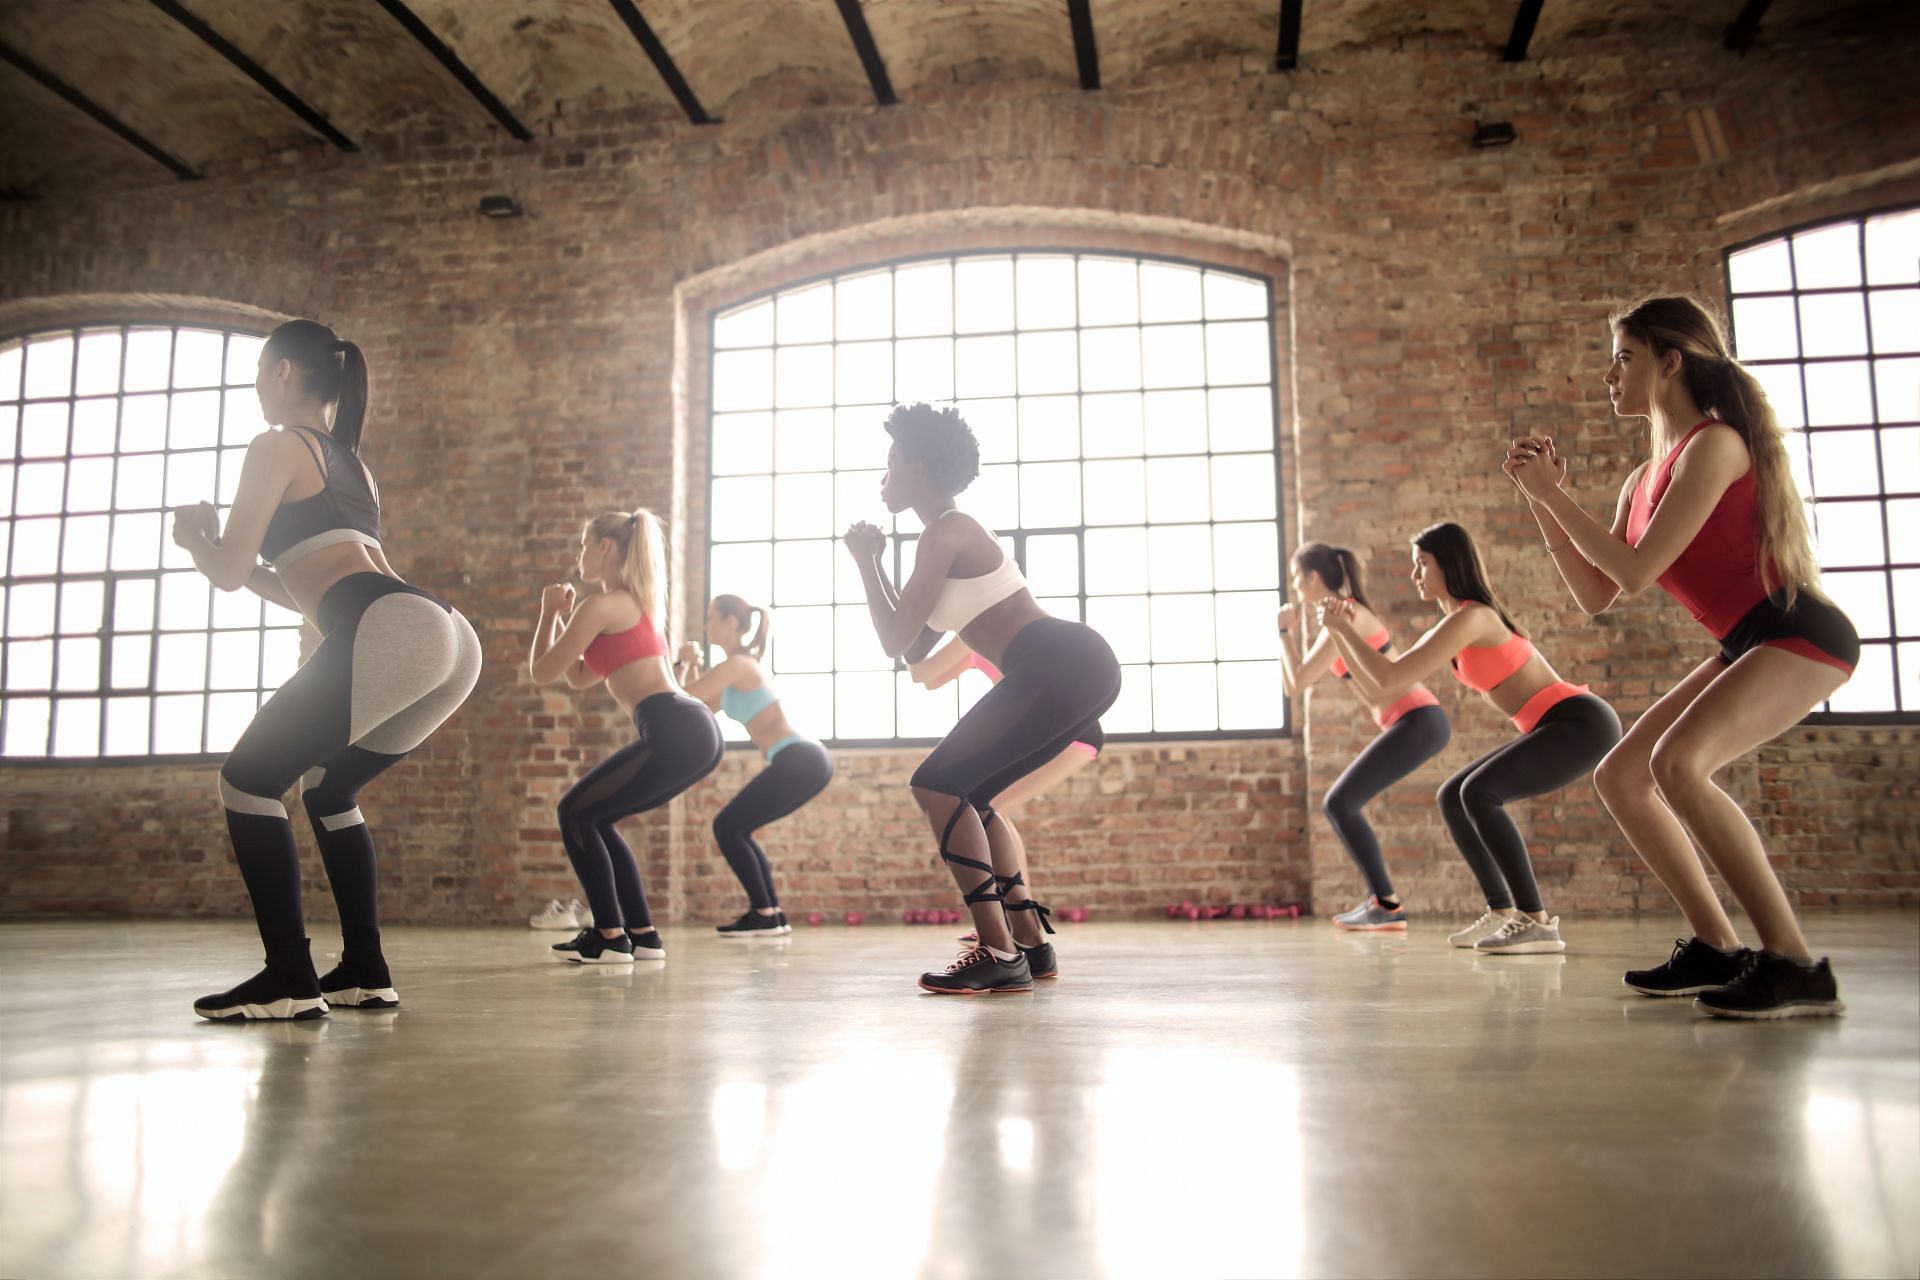 Squats are great for strengthening your glutes, quads, hamstrings, and core (Image via Pexels @Andrea Piacquadio)